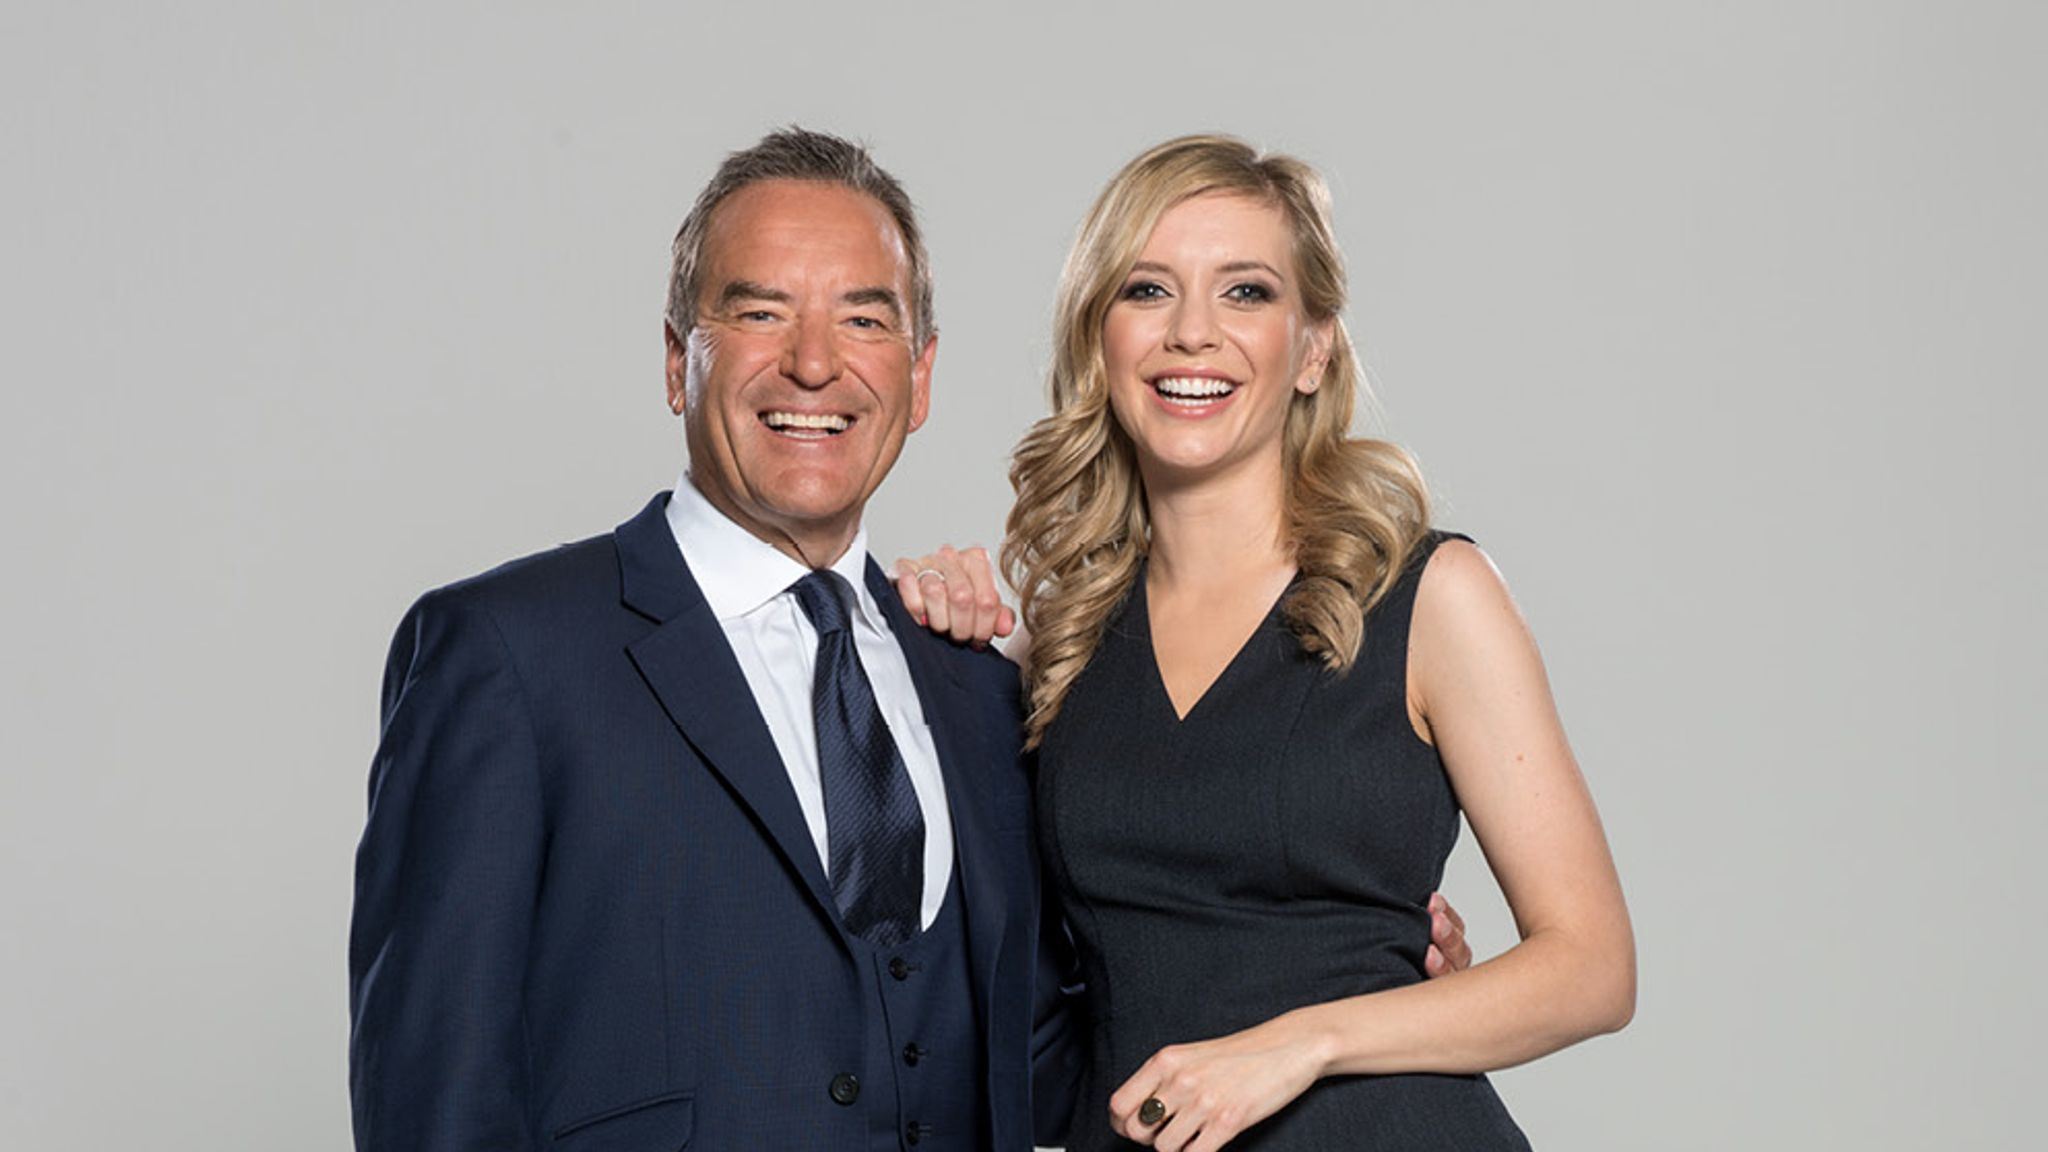 Jeff Stelling and Rachel Riley discuss their Friday Night Football plans |  Football News | Sky Sports